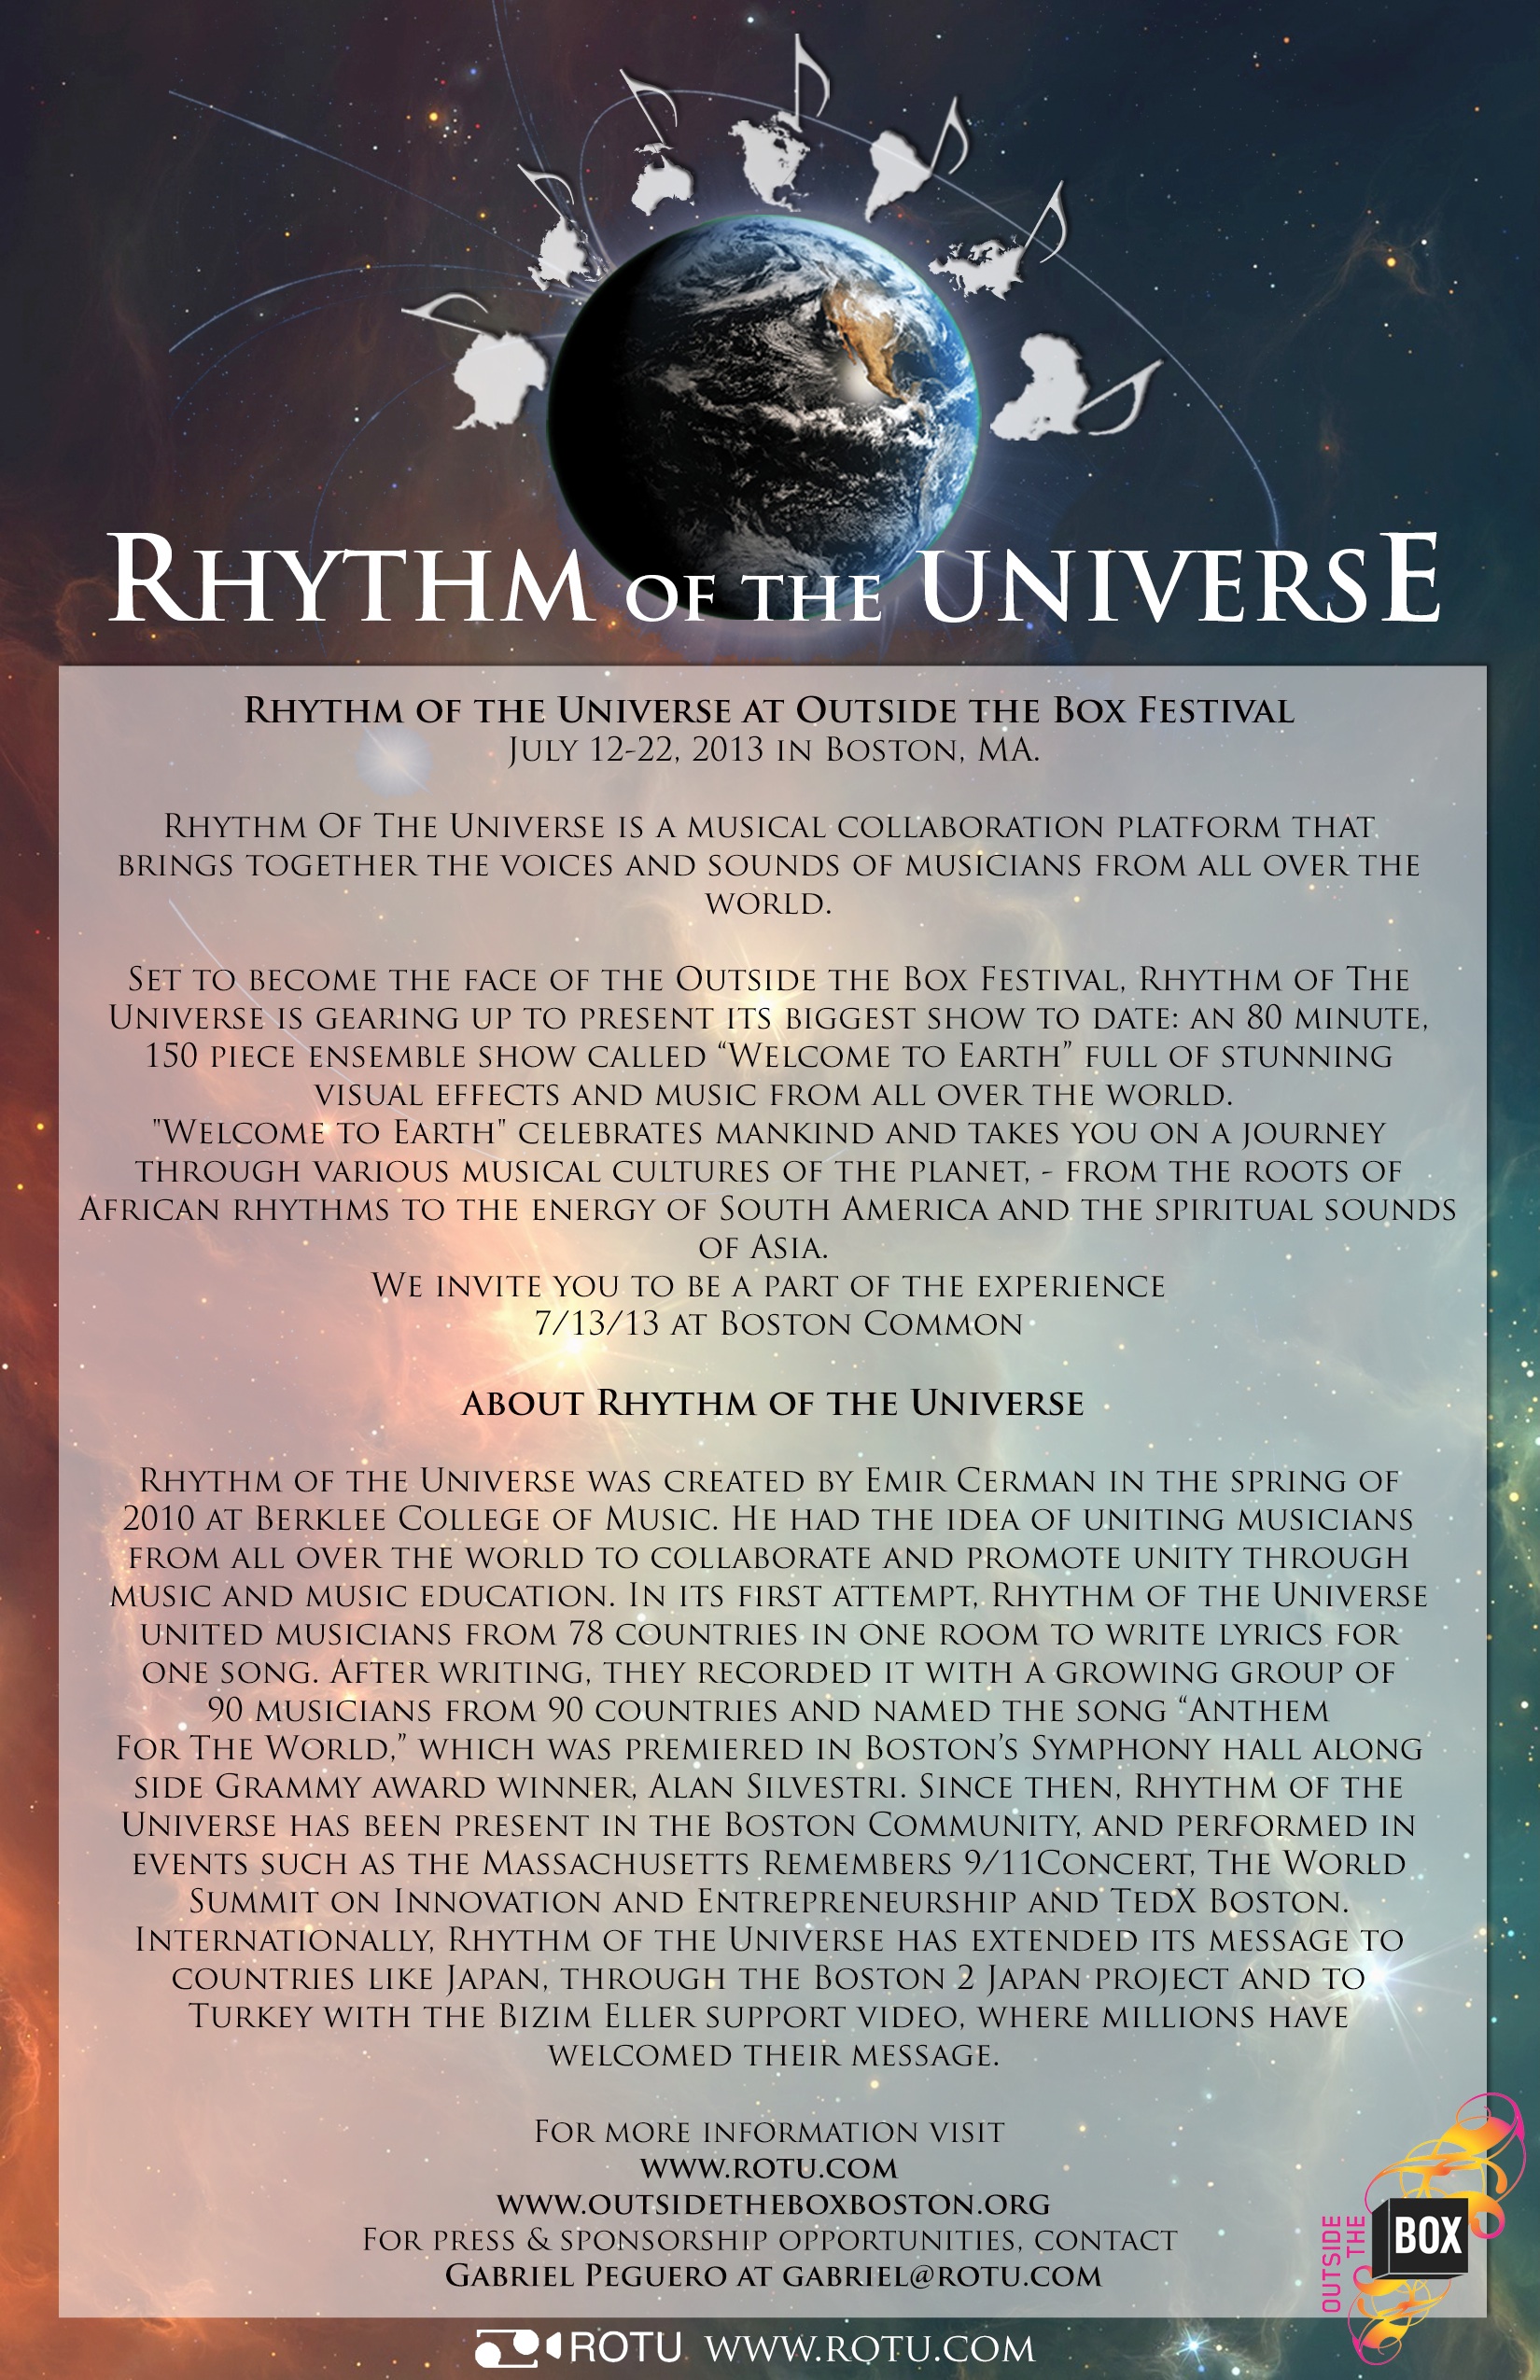 About Rhythm of the Universe @ Outside the Box festival